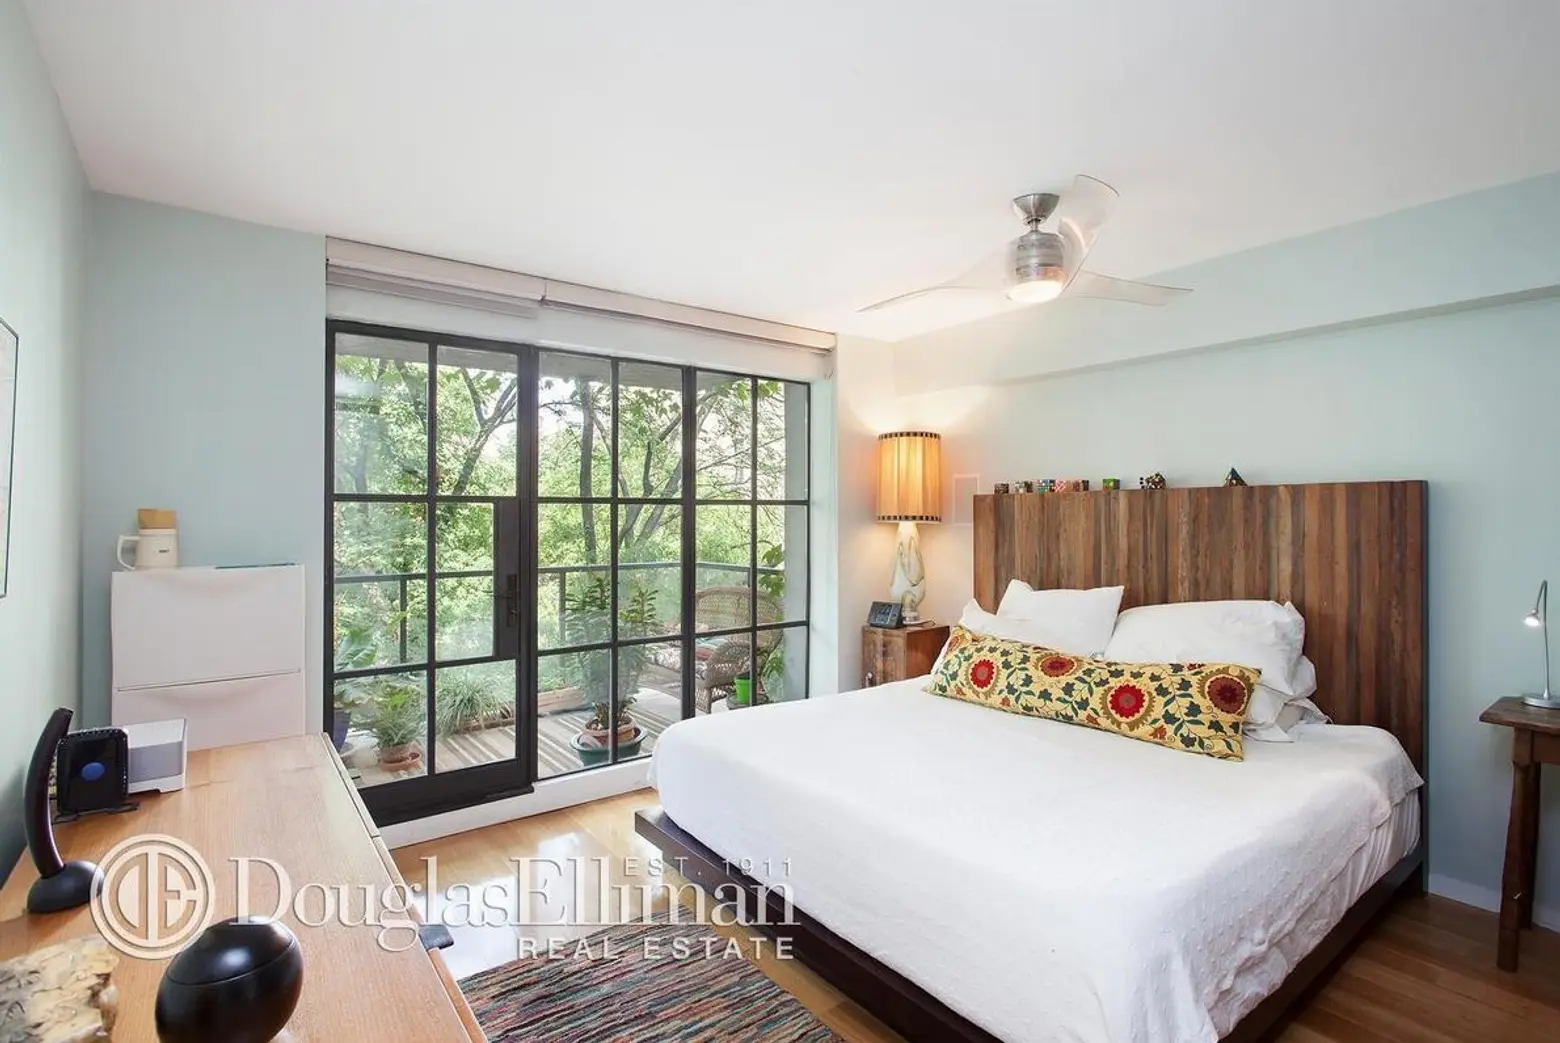 Flowerbox Building, 259 East 7th Street, East Village, NYC, Condo for sale